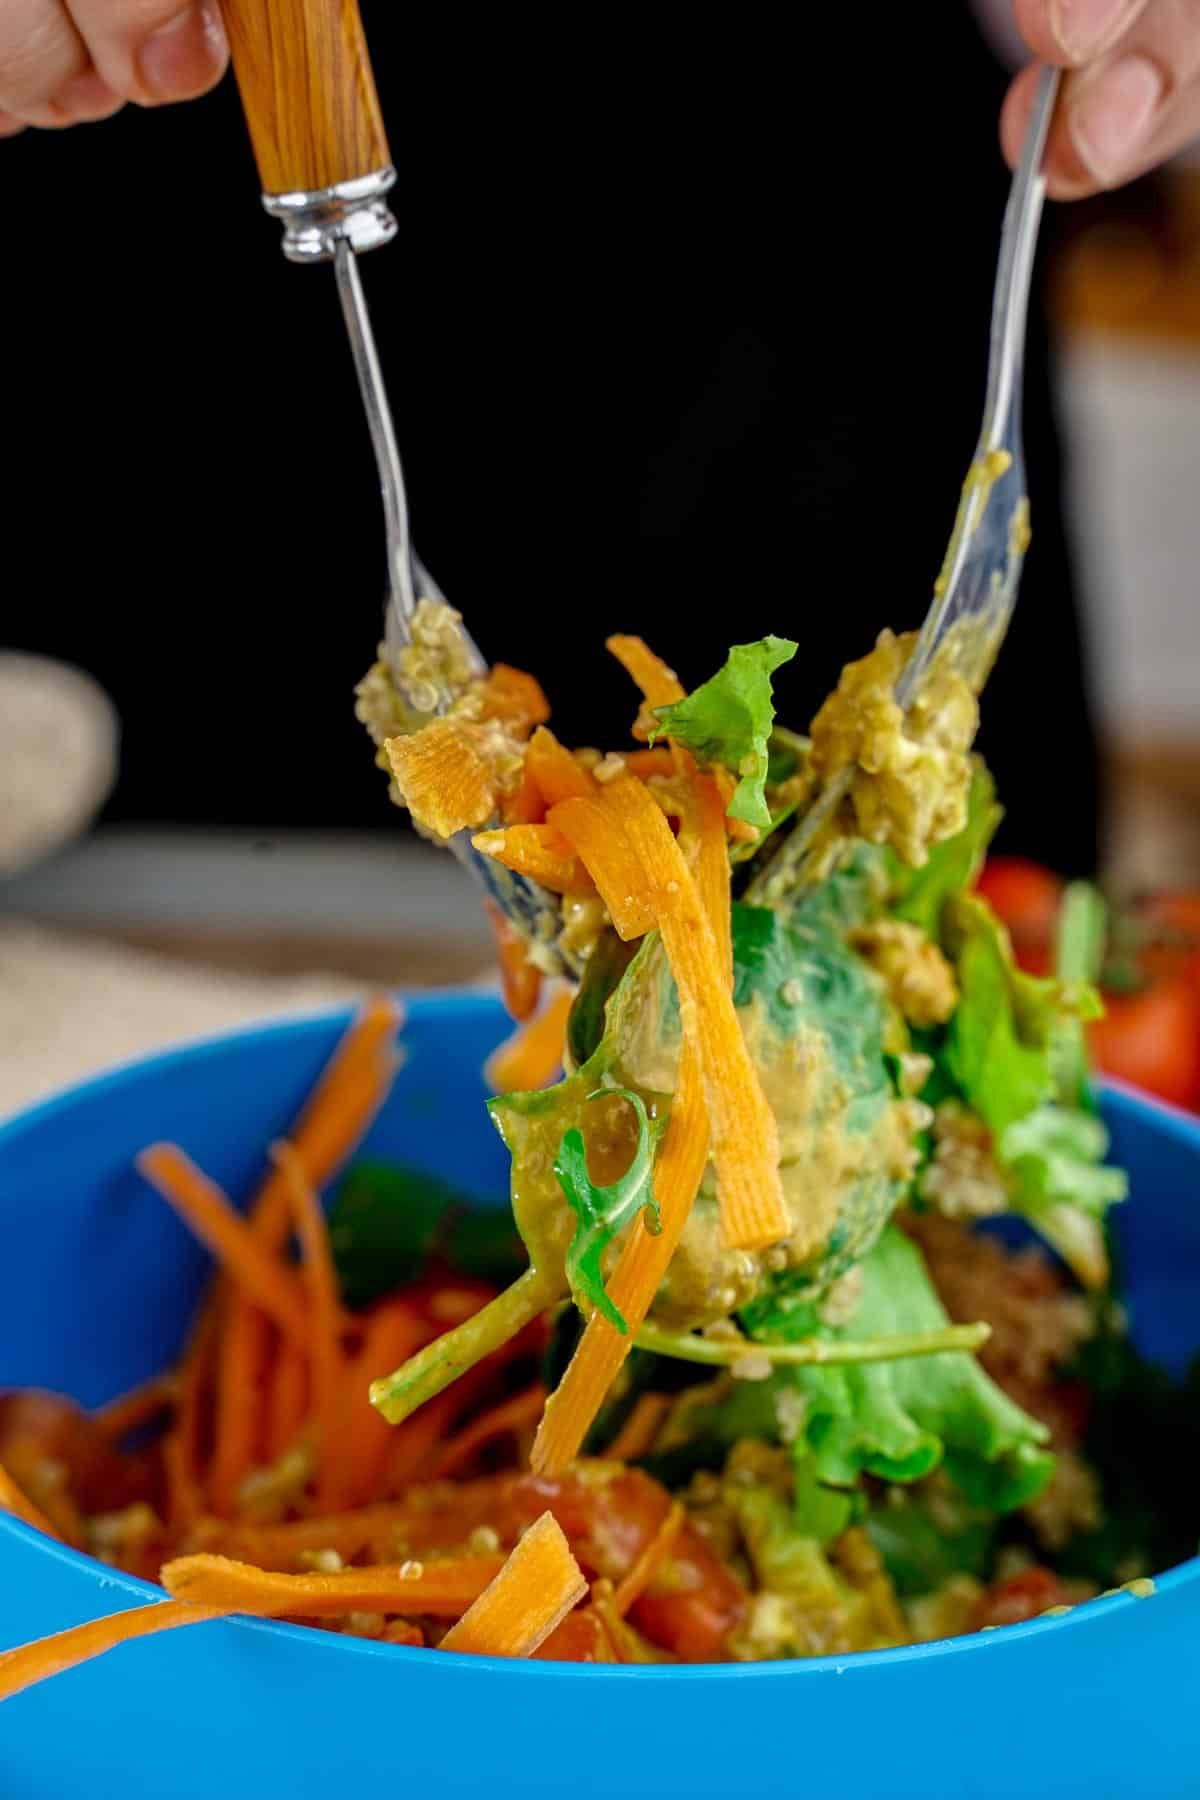 two forks holding up salad out of blue bowl